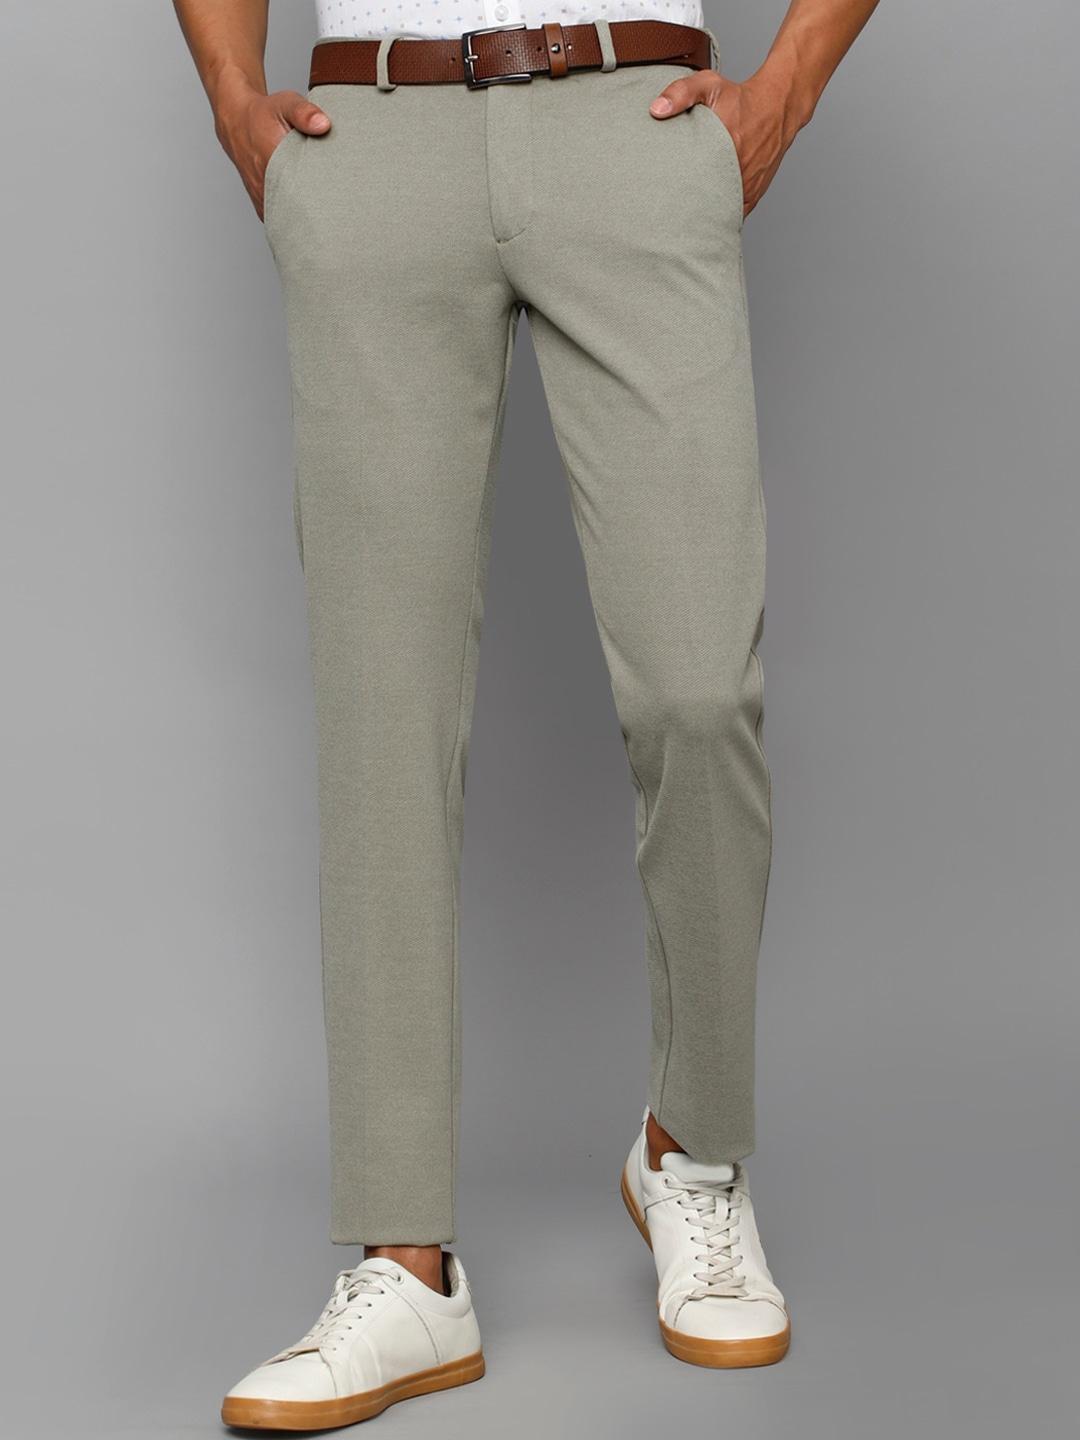 Allen Solly Men Textured Slim Fit Mid-Rise Chinos Trouser